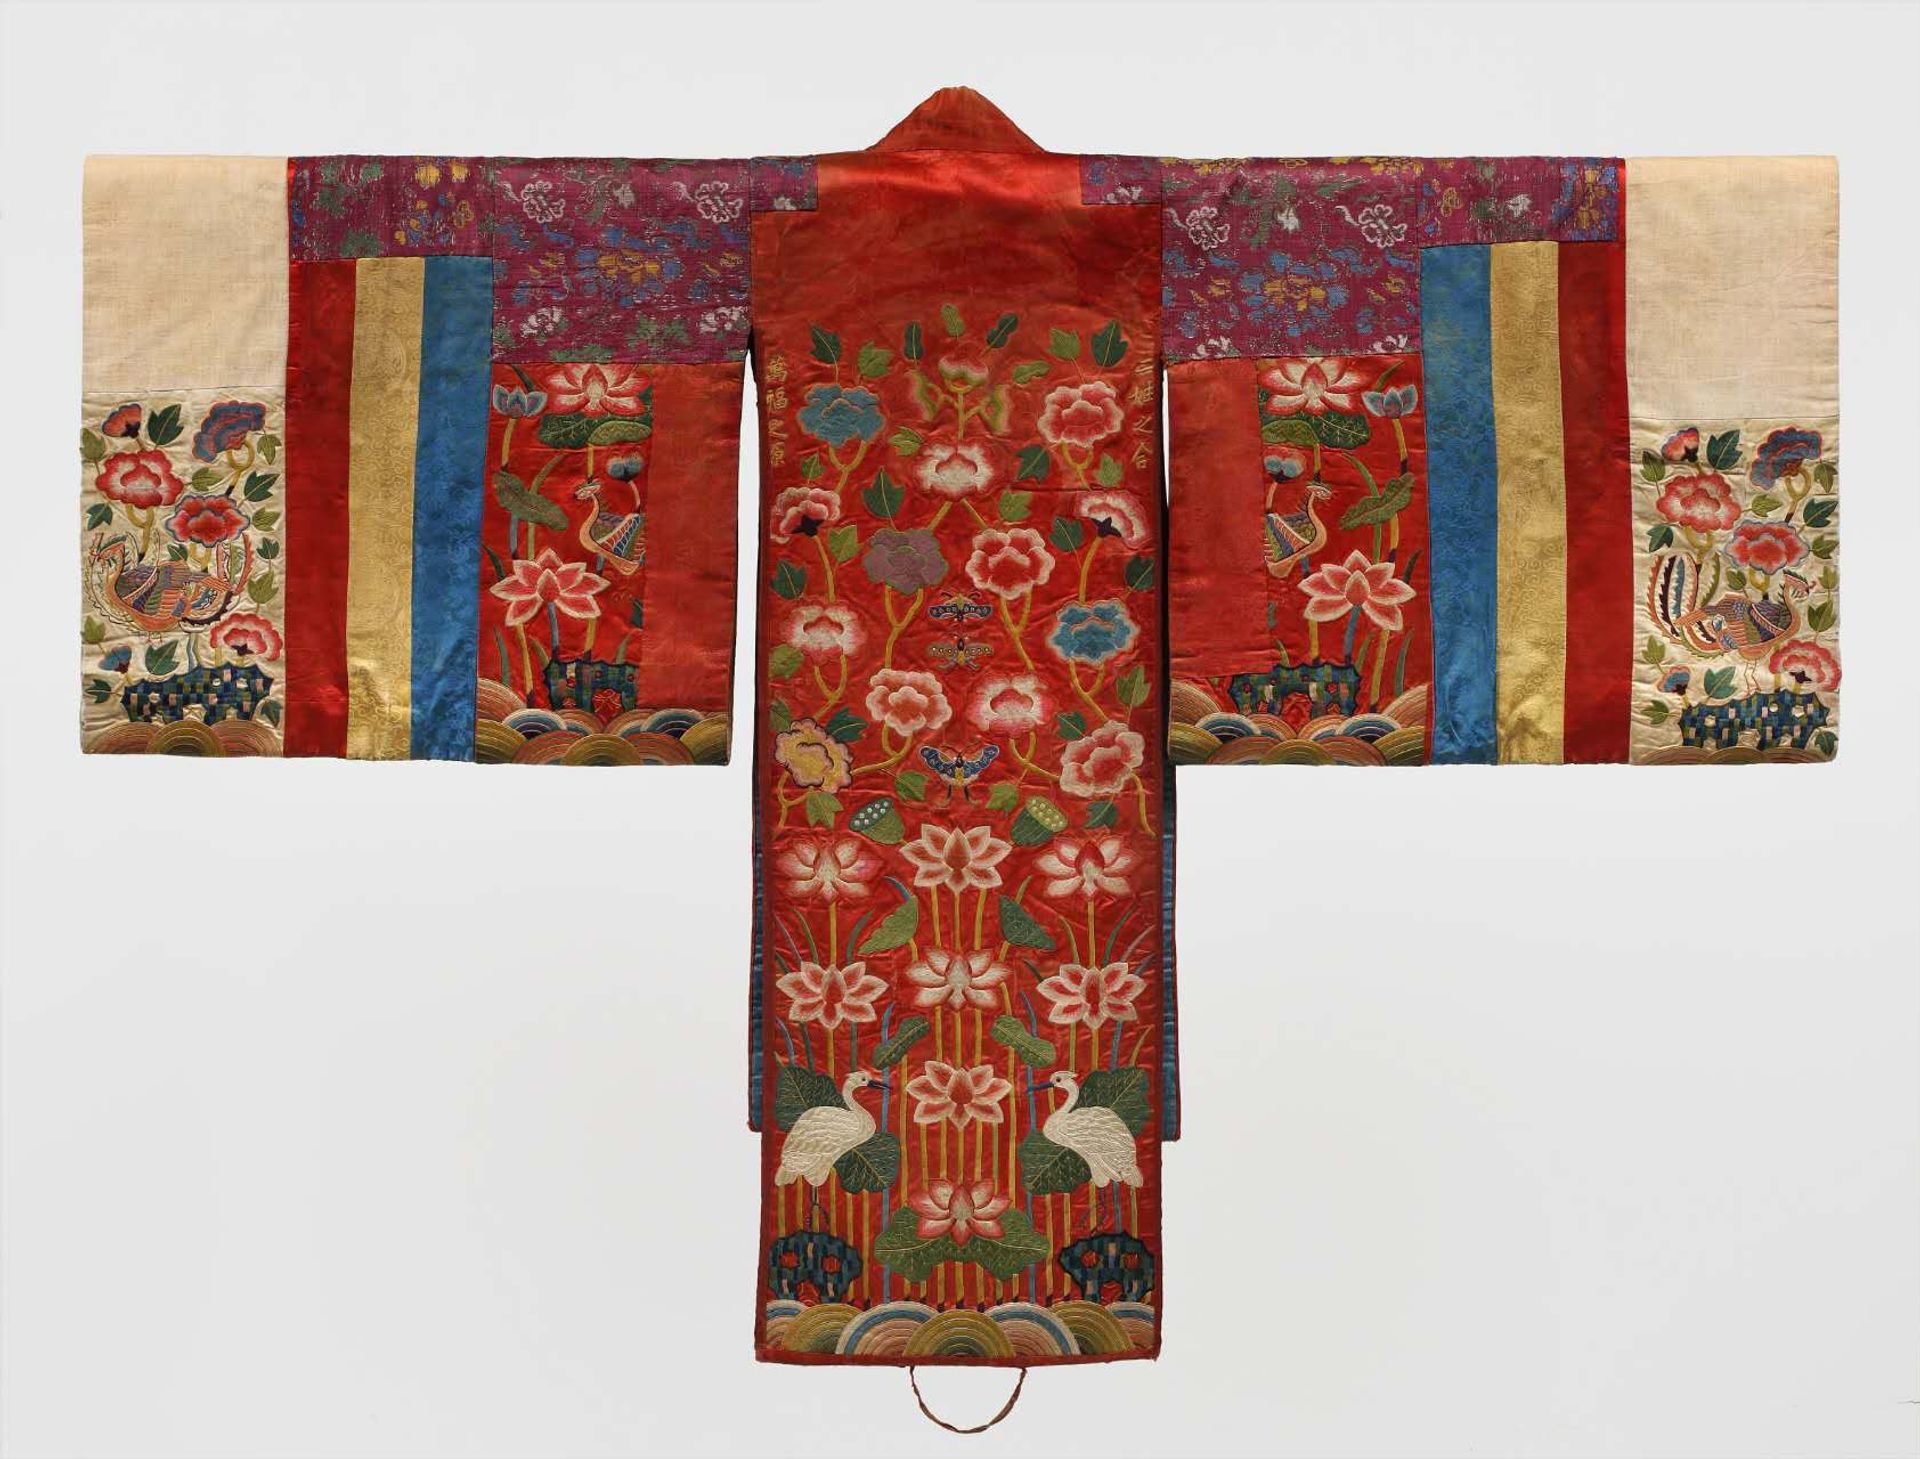 A royal hwarot robe from the Joseon Dynasty-era (1392-1910), held in the collection of the Los Angeles County Museum of Art. 

Courtesy of Lacma